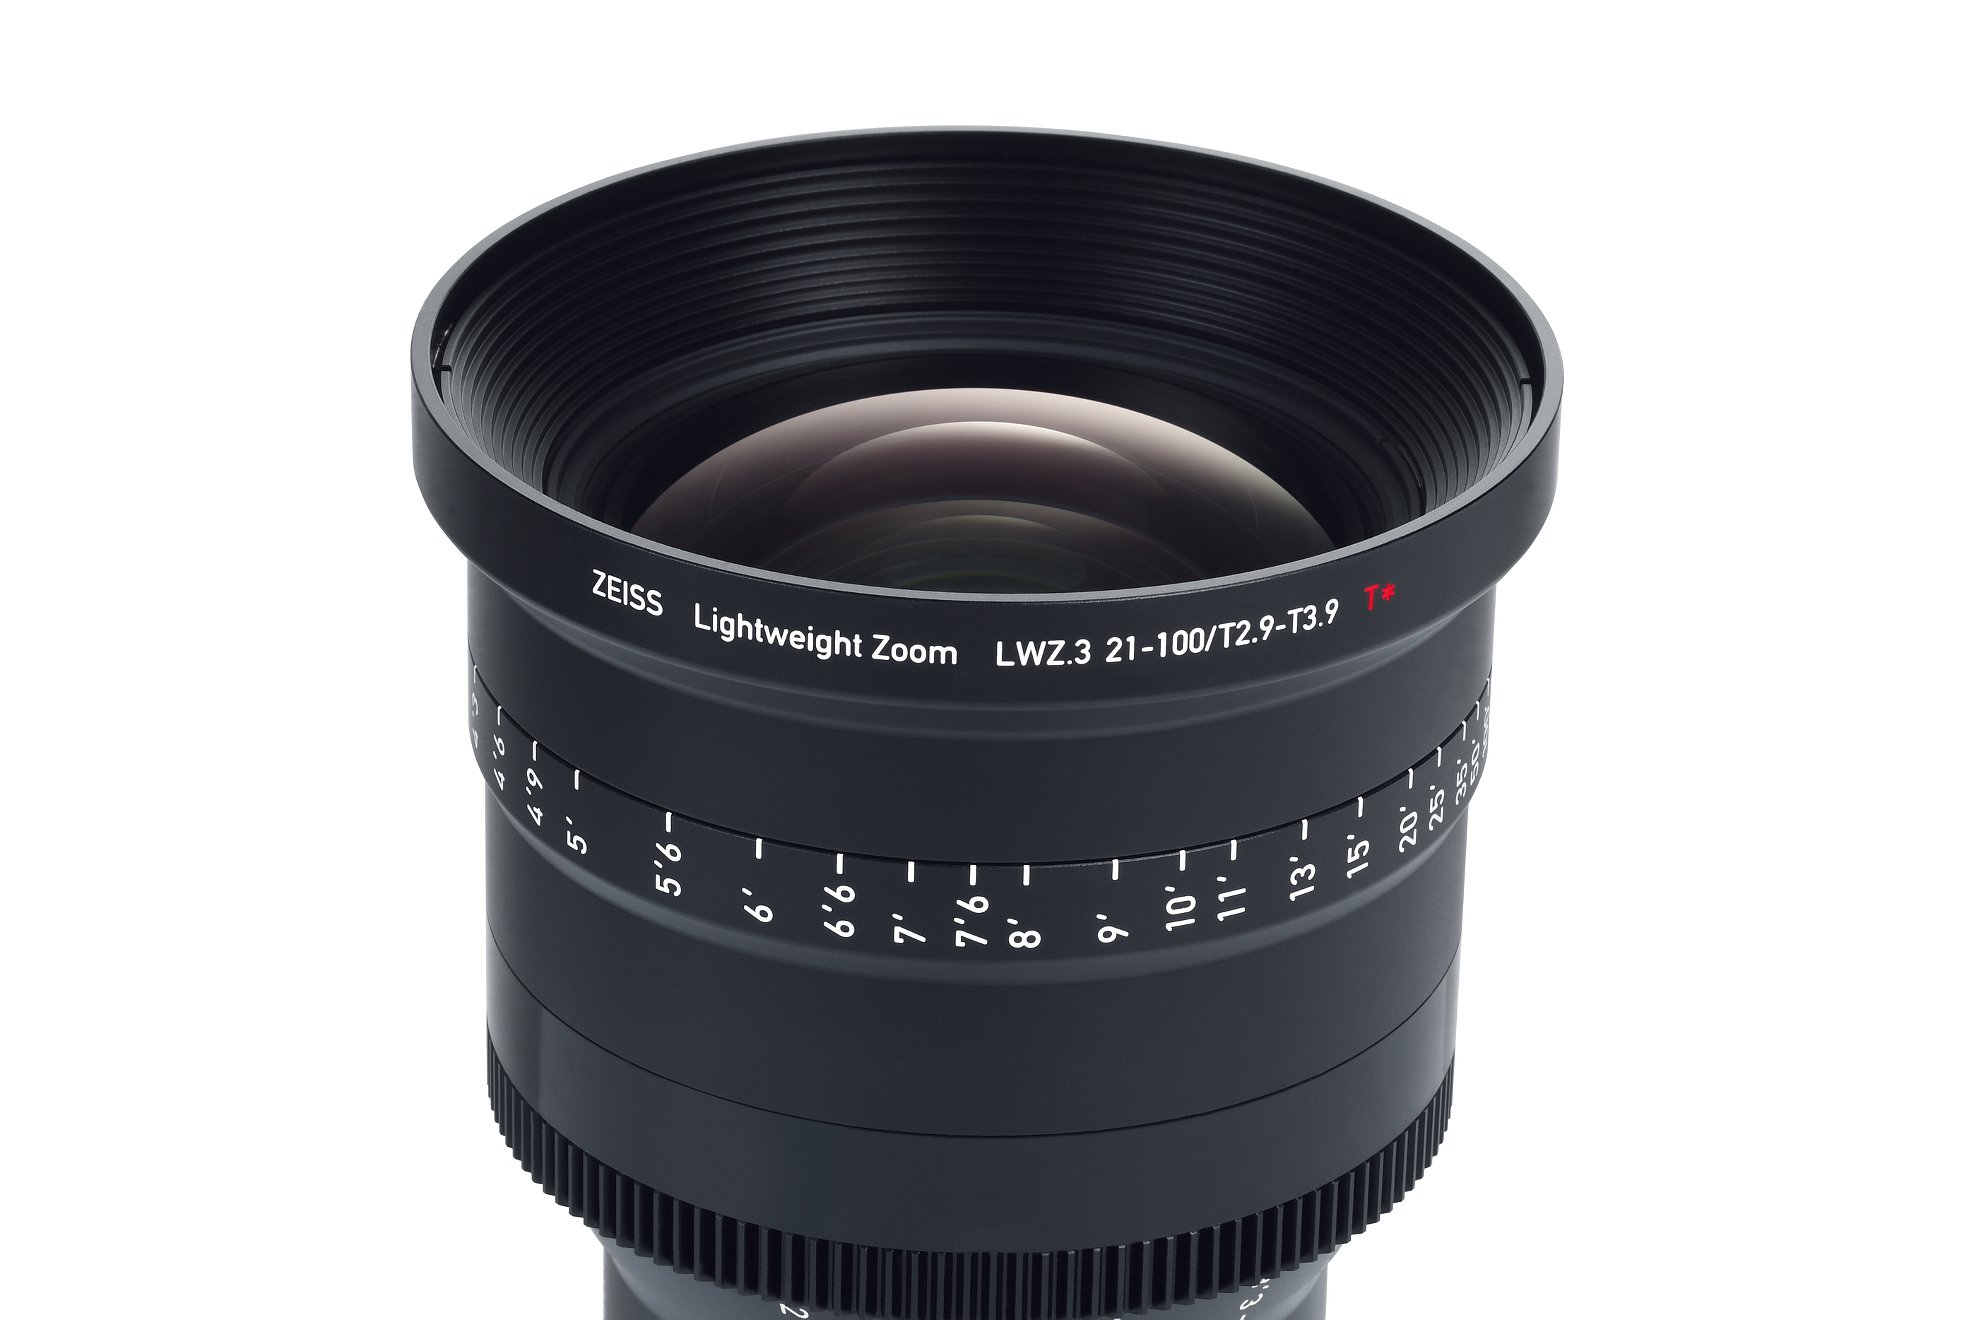 ZEISS Lightweight Zoom LWZ.3 | When you turn motion into emotion